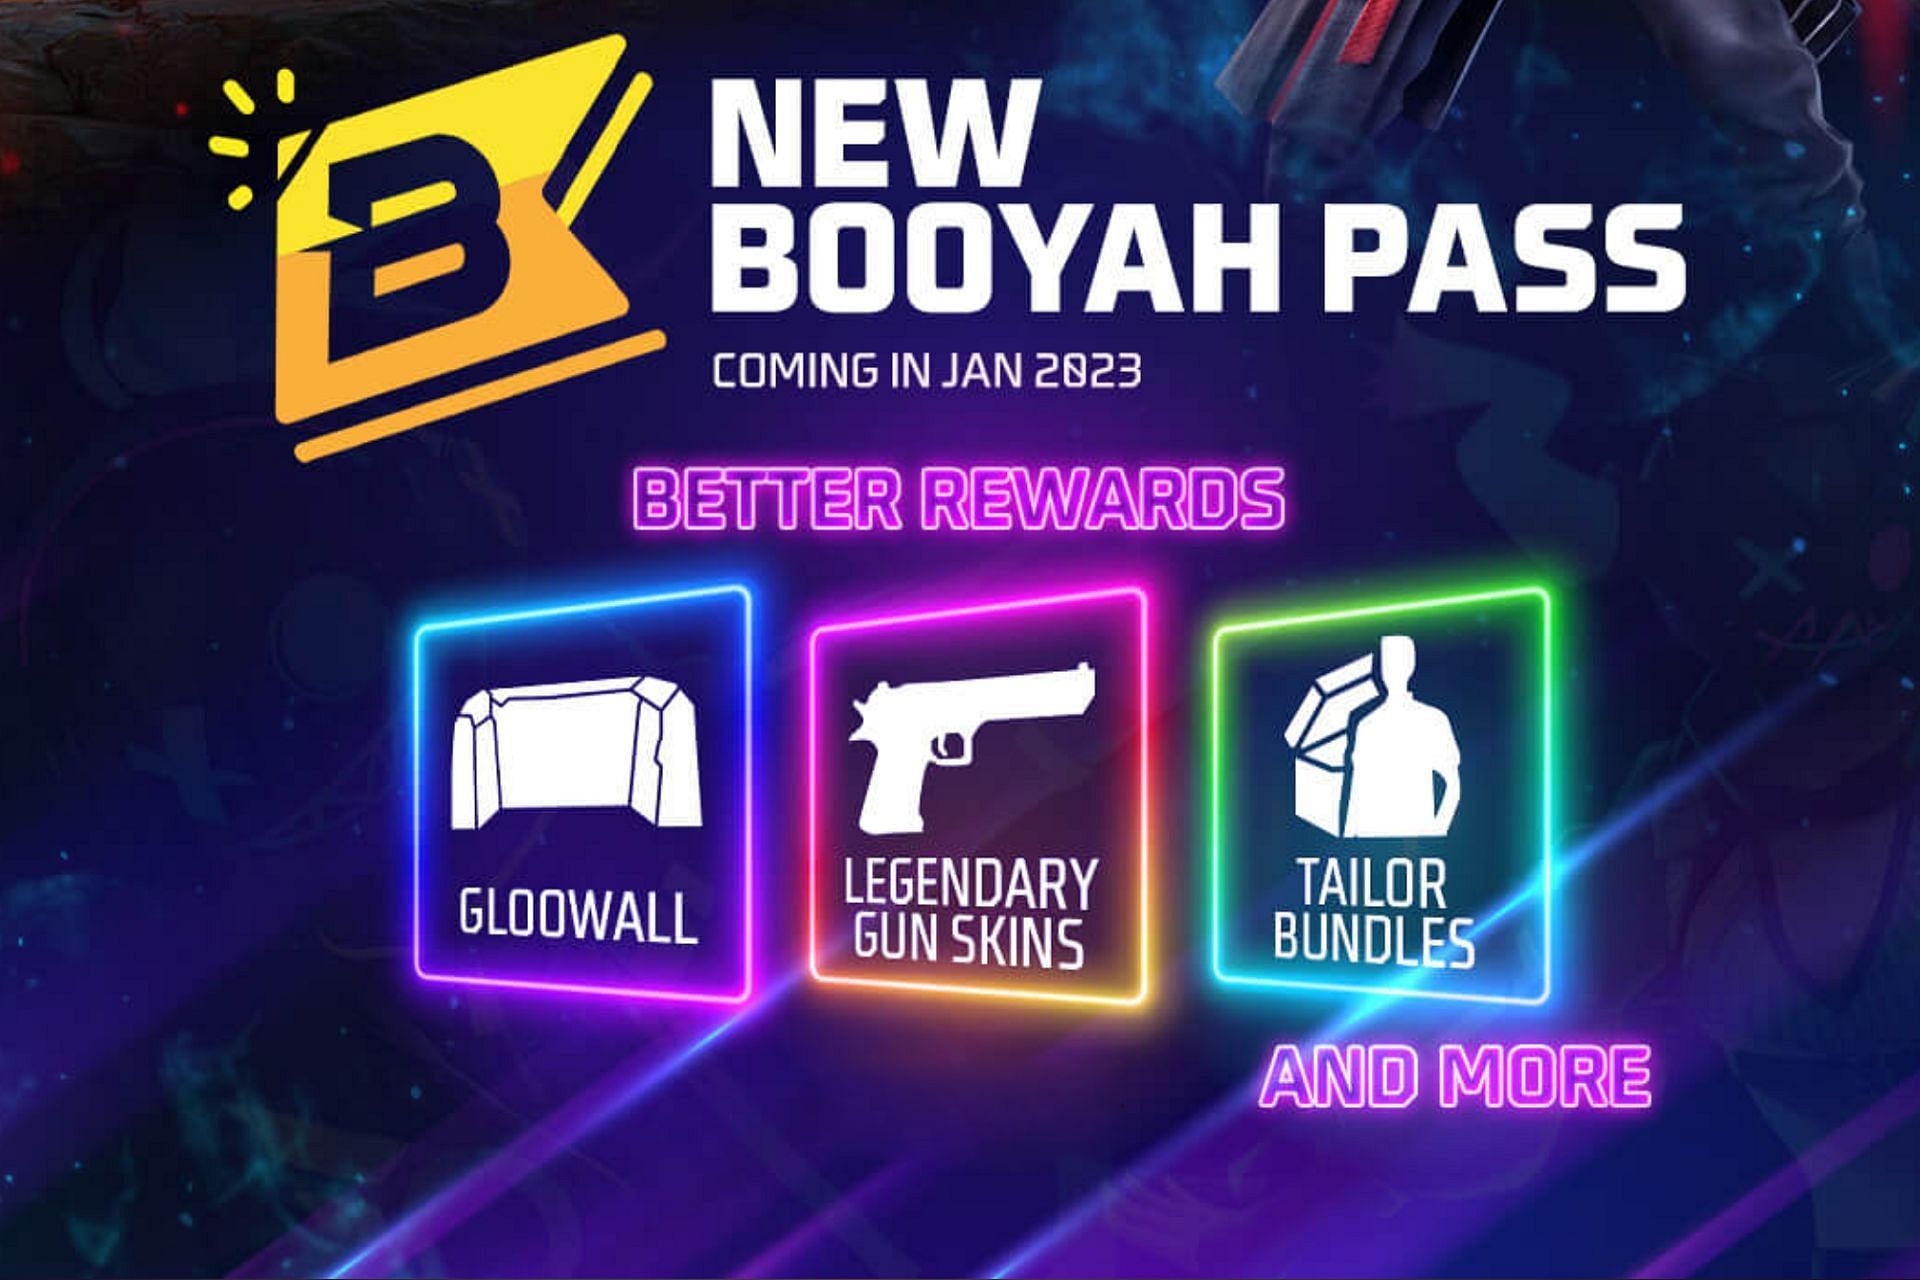 How to get free diamonds for Free Fire Booyah Pass in 2023